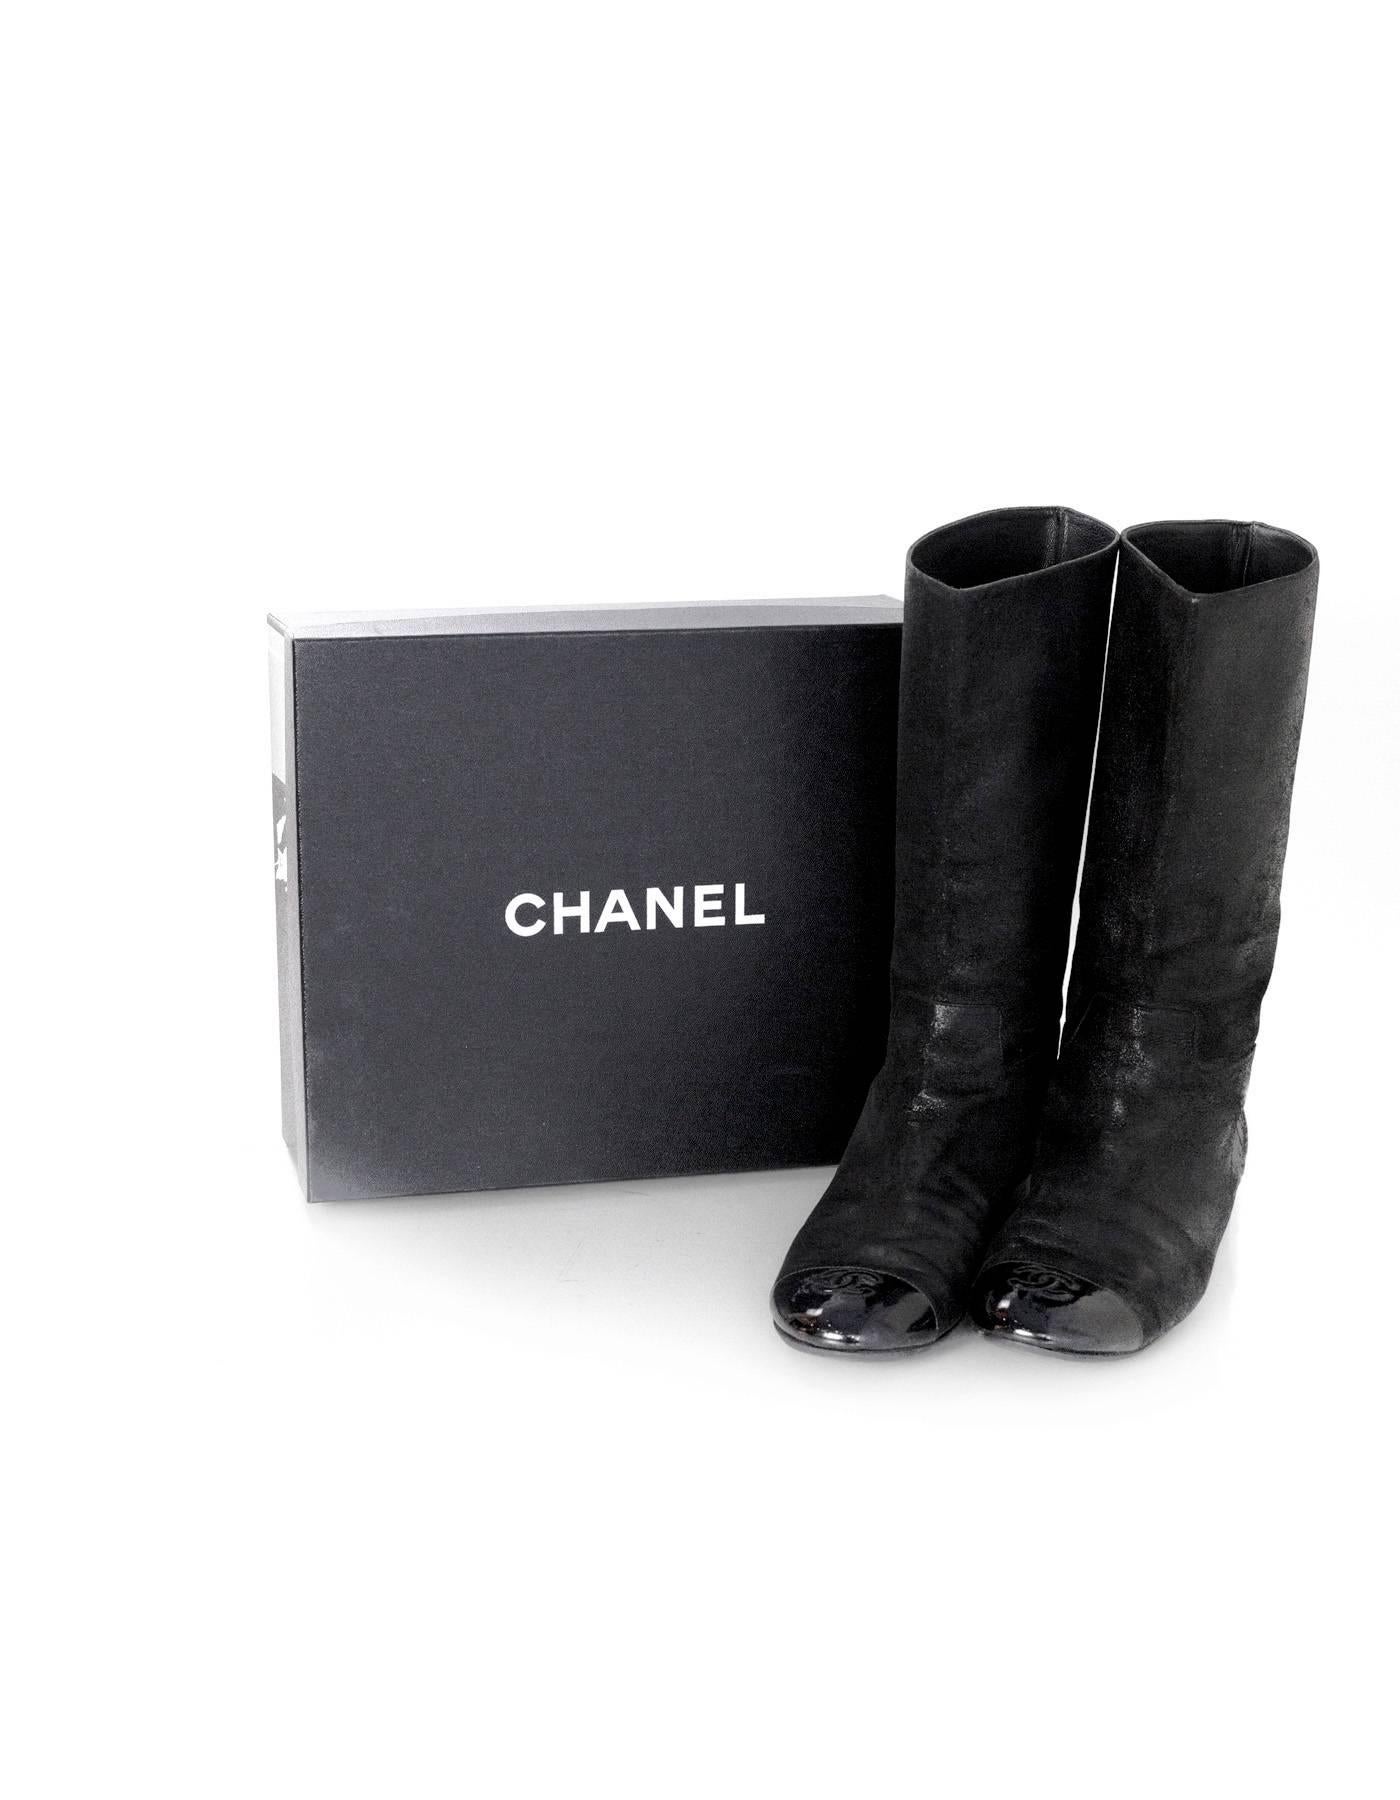 Chanel Black Iridescent Sueded Leather Boots sz 38 w/BOX 3